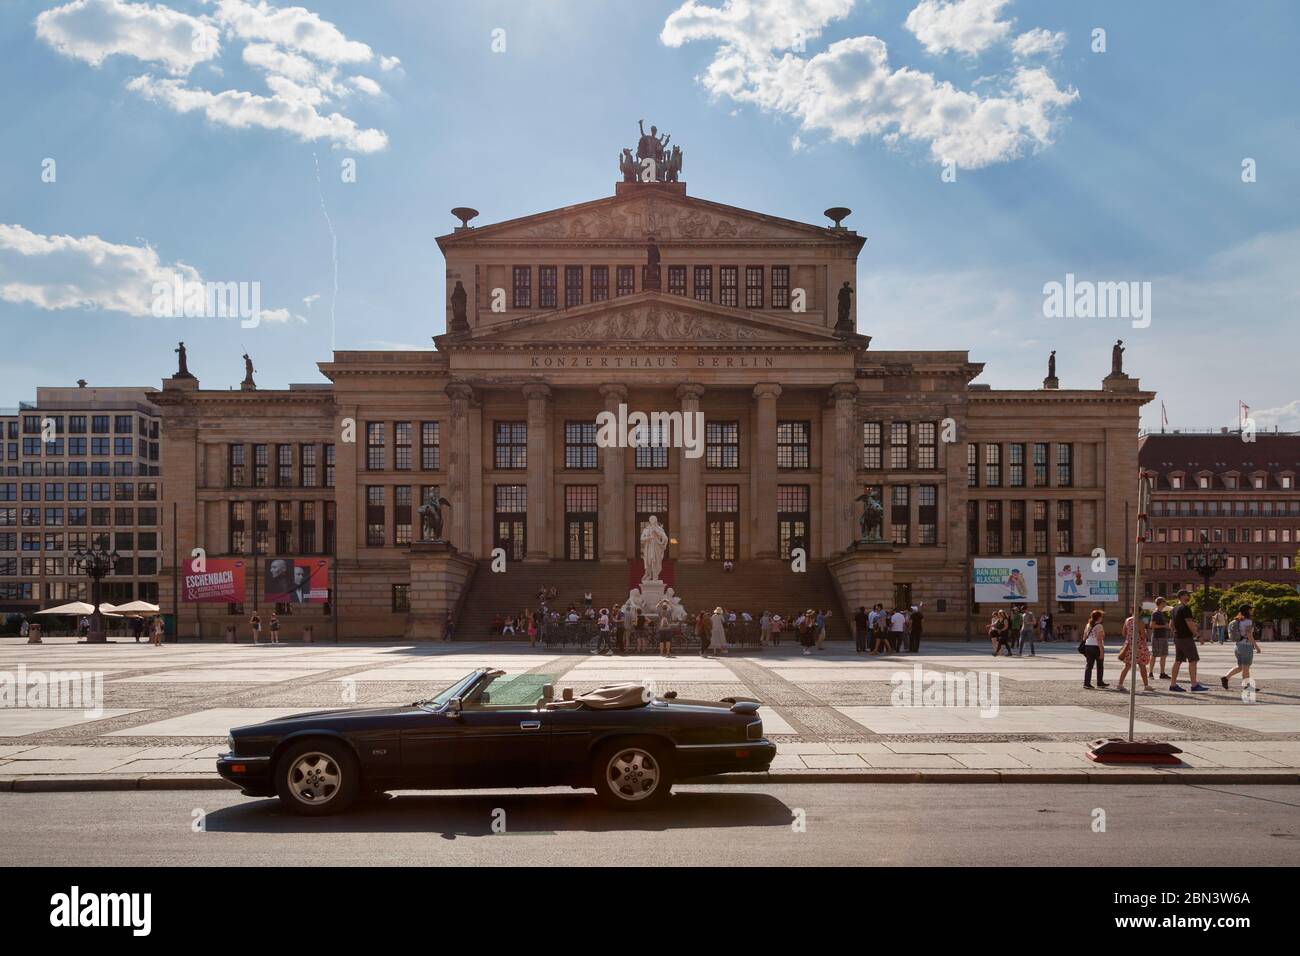 Berlin, Germany - June 03 2019: The Konzerthaus Berlin is a concert hall situated on the Gendarmenmarkt square in the central Mitte district housing t Stock Photo